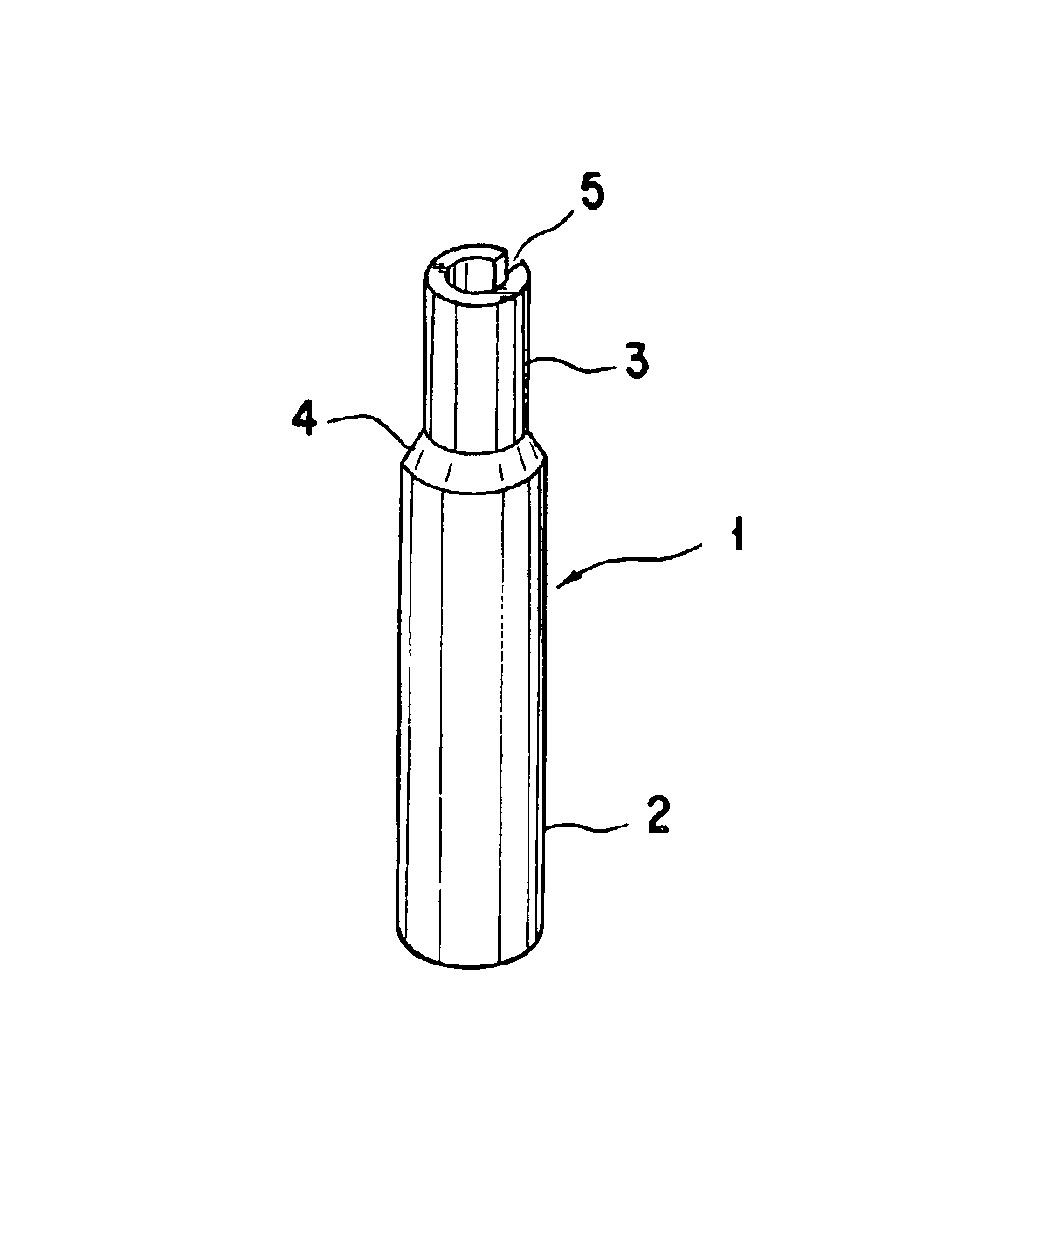 Hollow cast article with slit, method and apparatus for production thereof